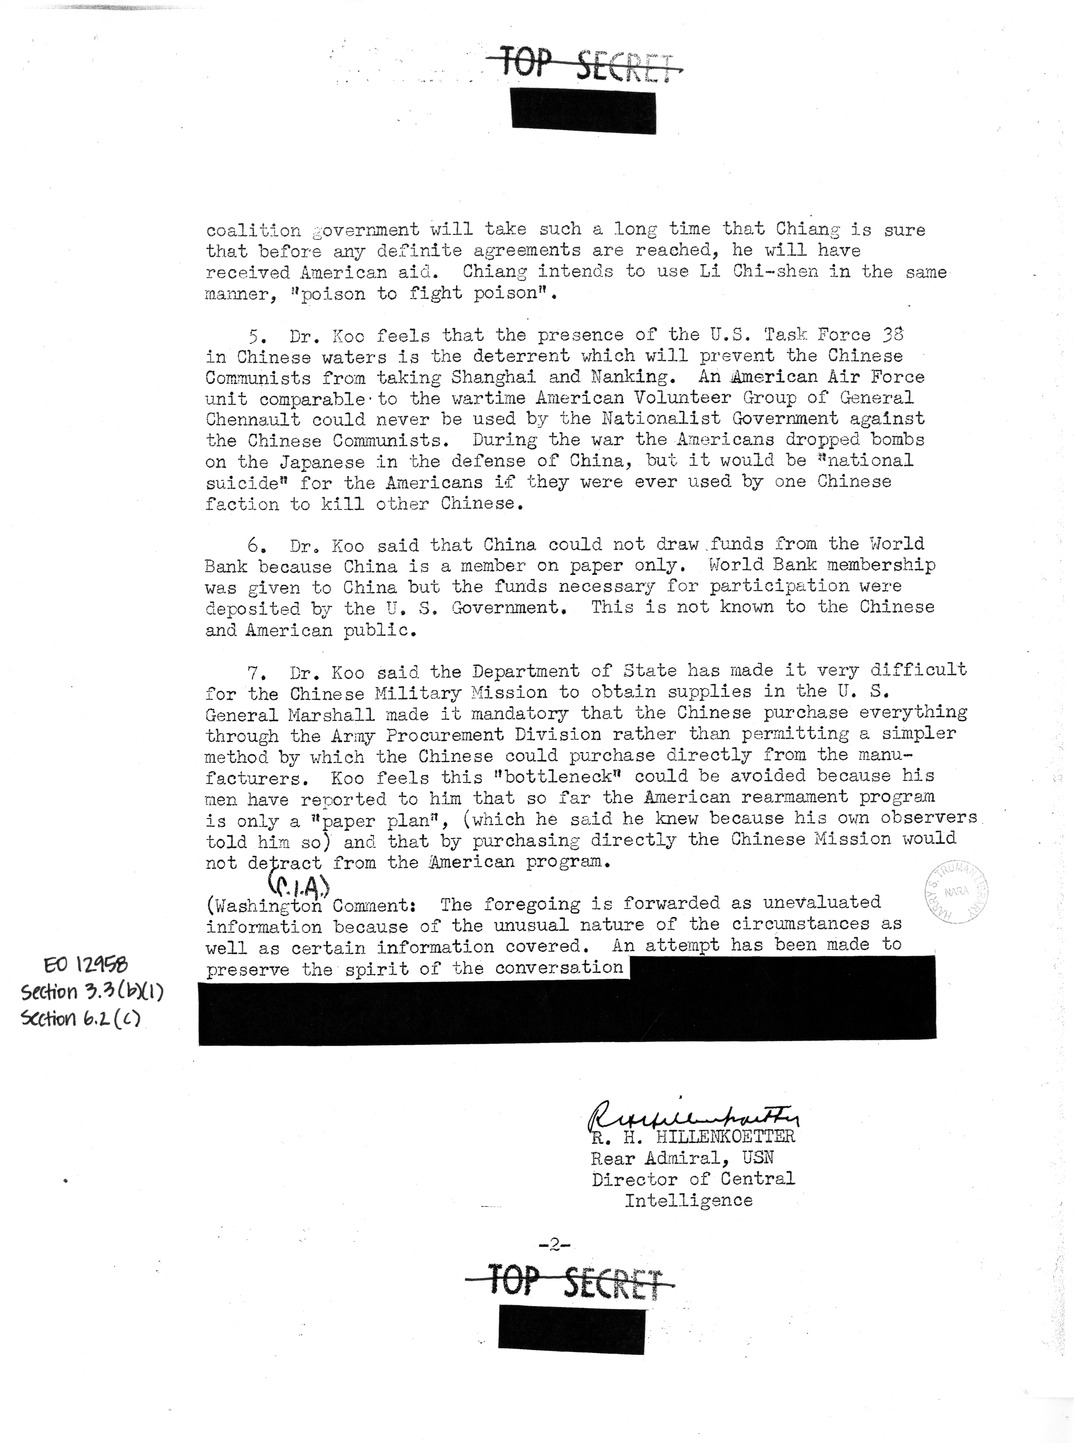 Memorandum from R. H. Hillenkoetter, with Attachments and Related Material [Sanitized Copy]